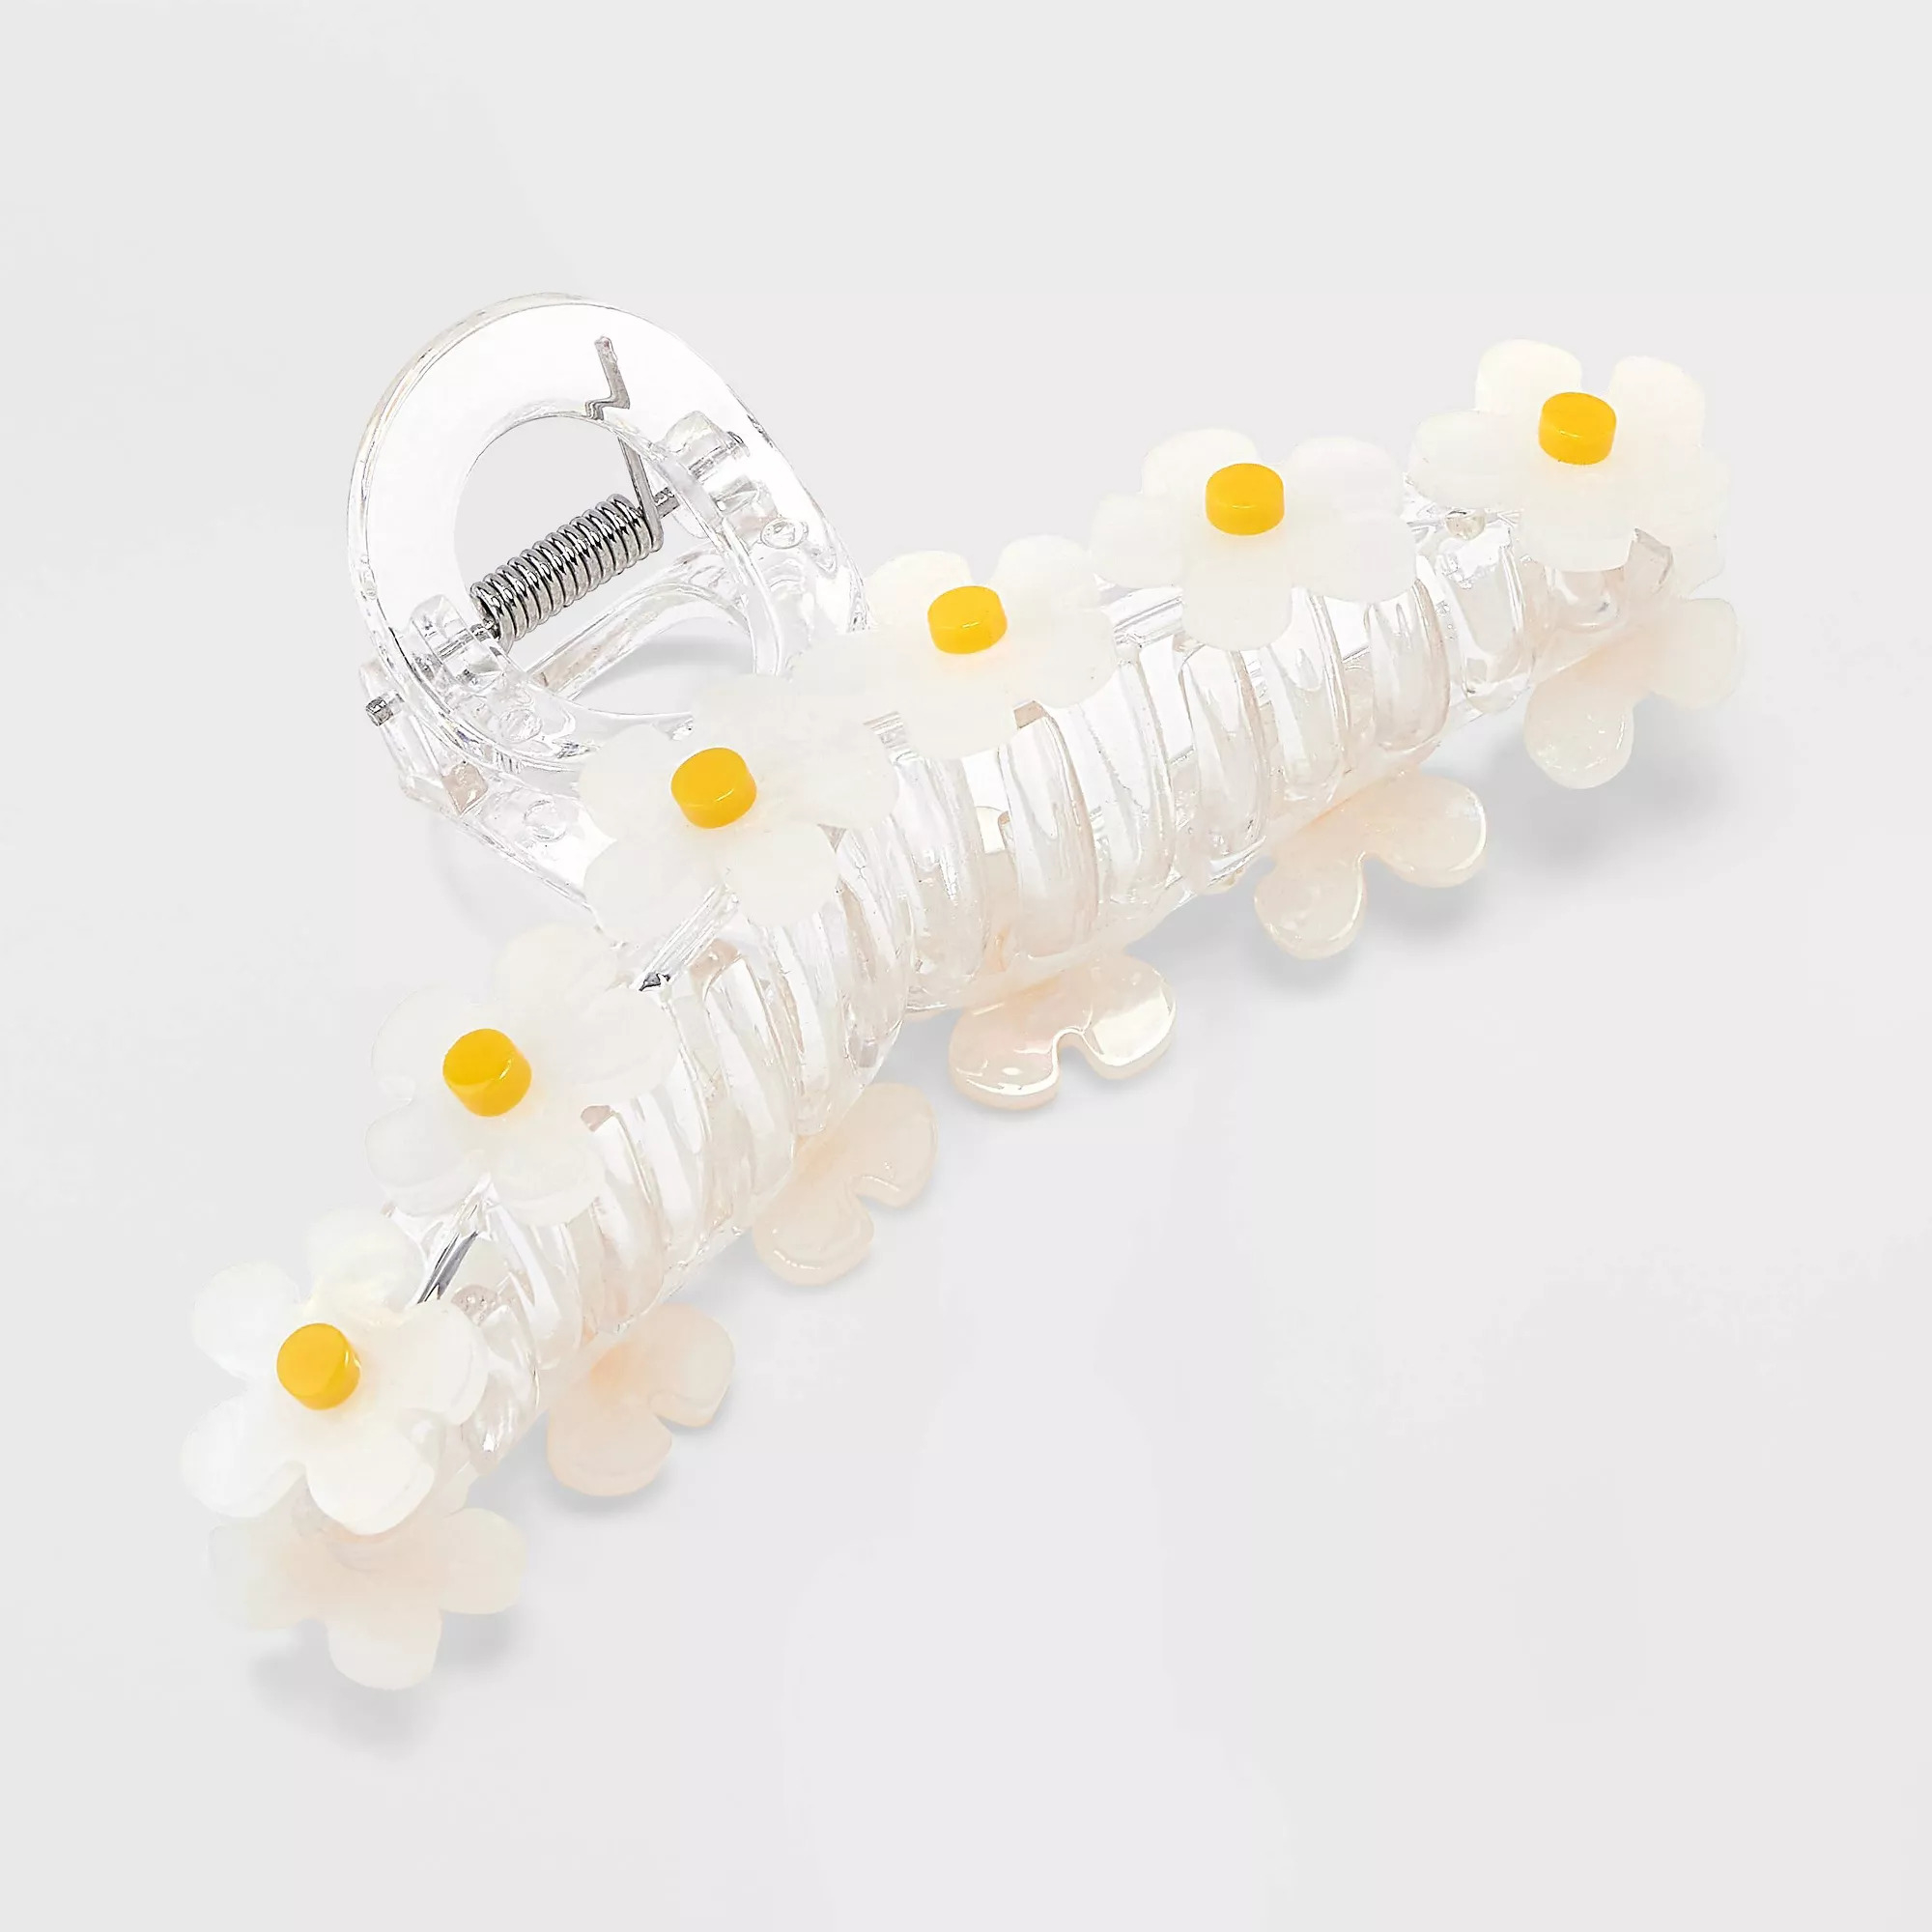 Clear hair clip adorned with white daisy decorations and yellow centers